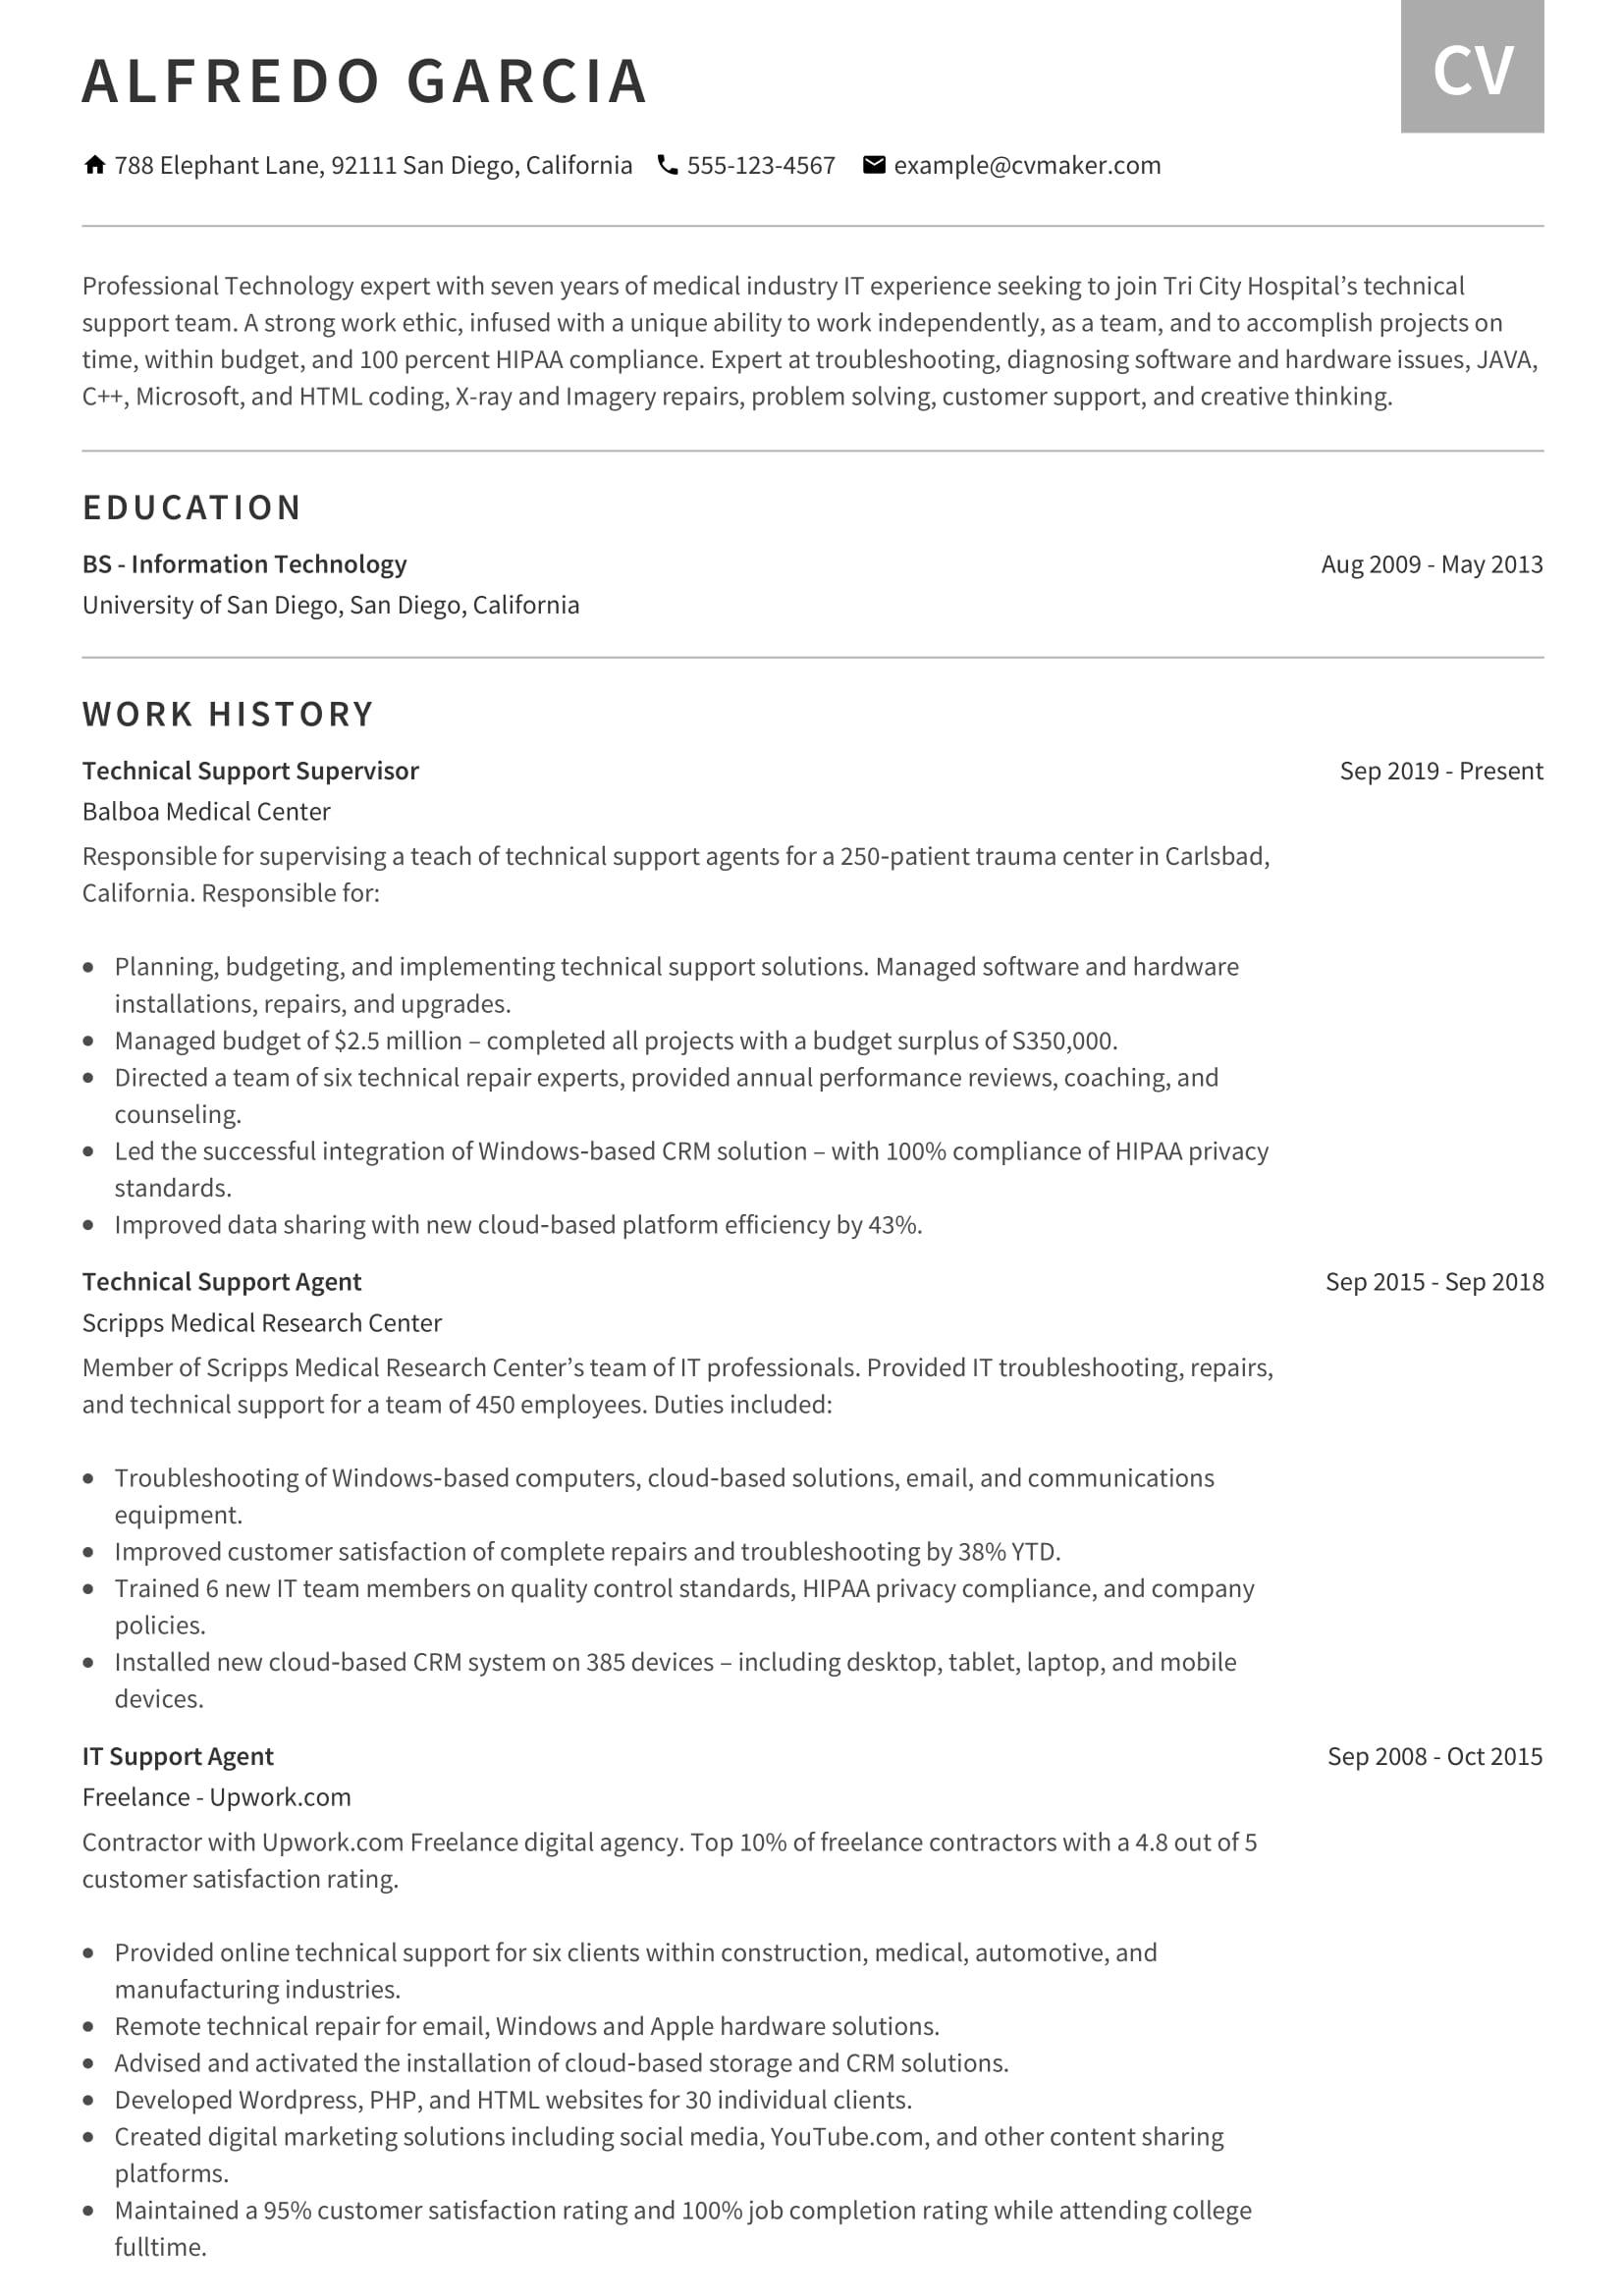 how to write a resume for technical support